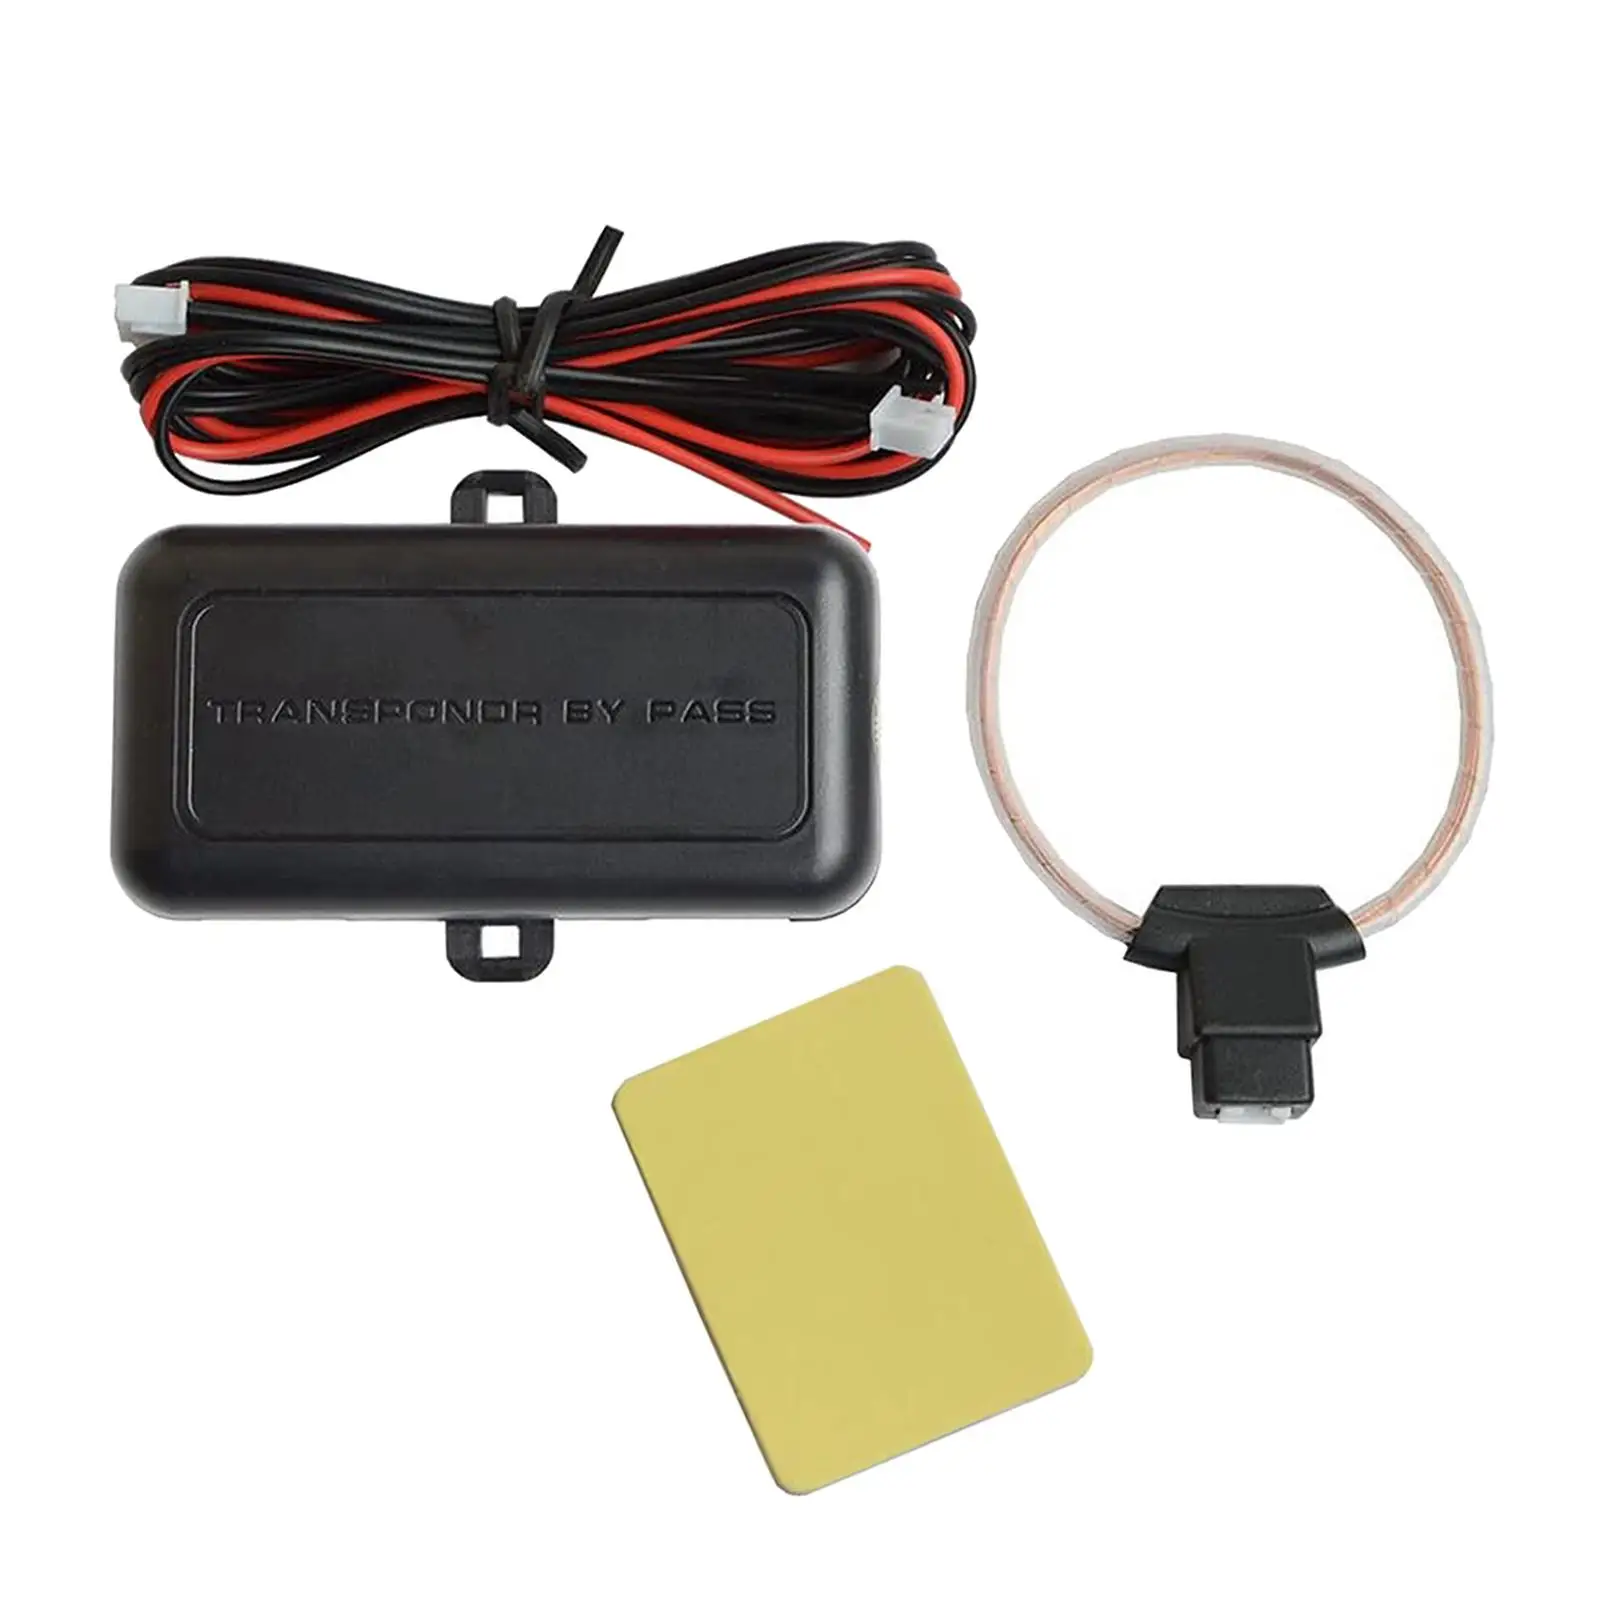 Immobilizer Module Signal Device for Cars W/Chip Keys